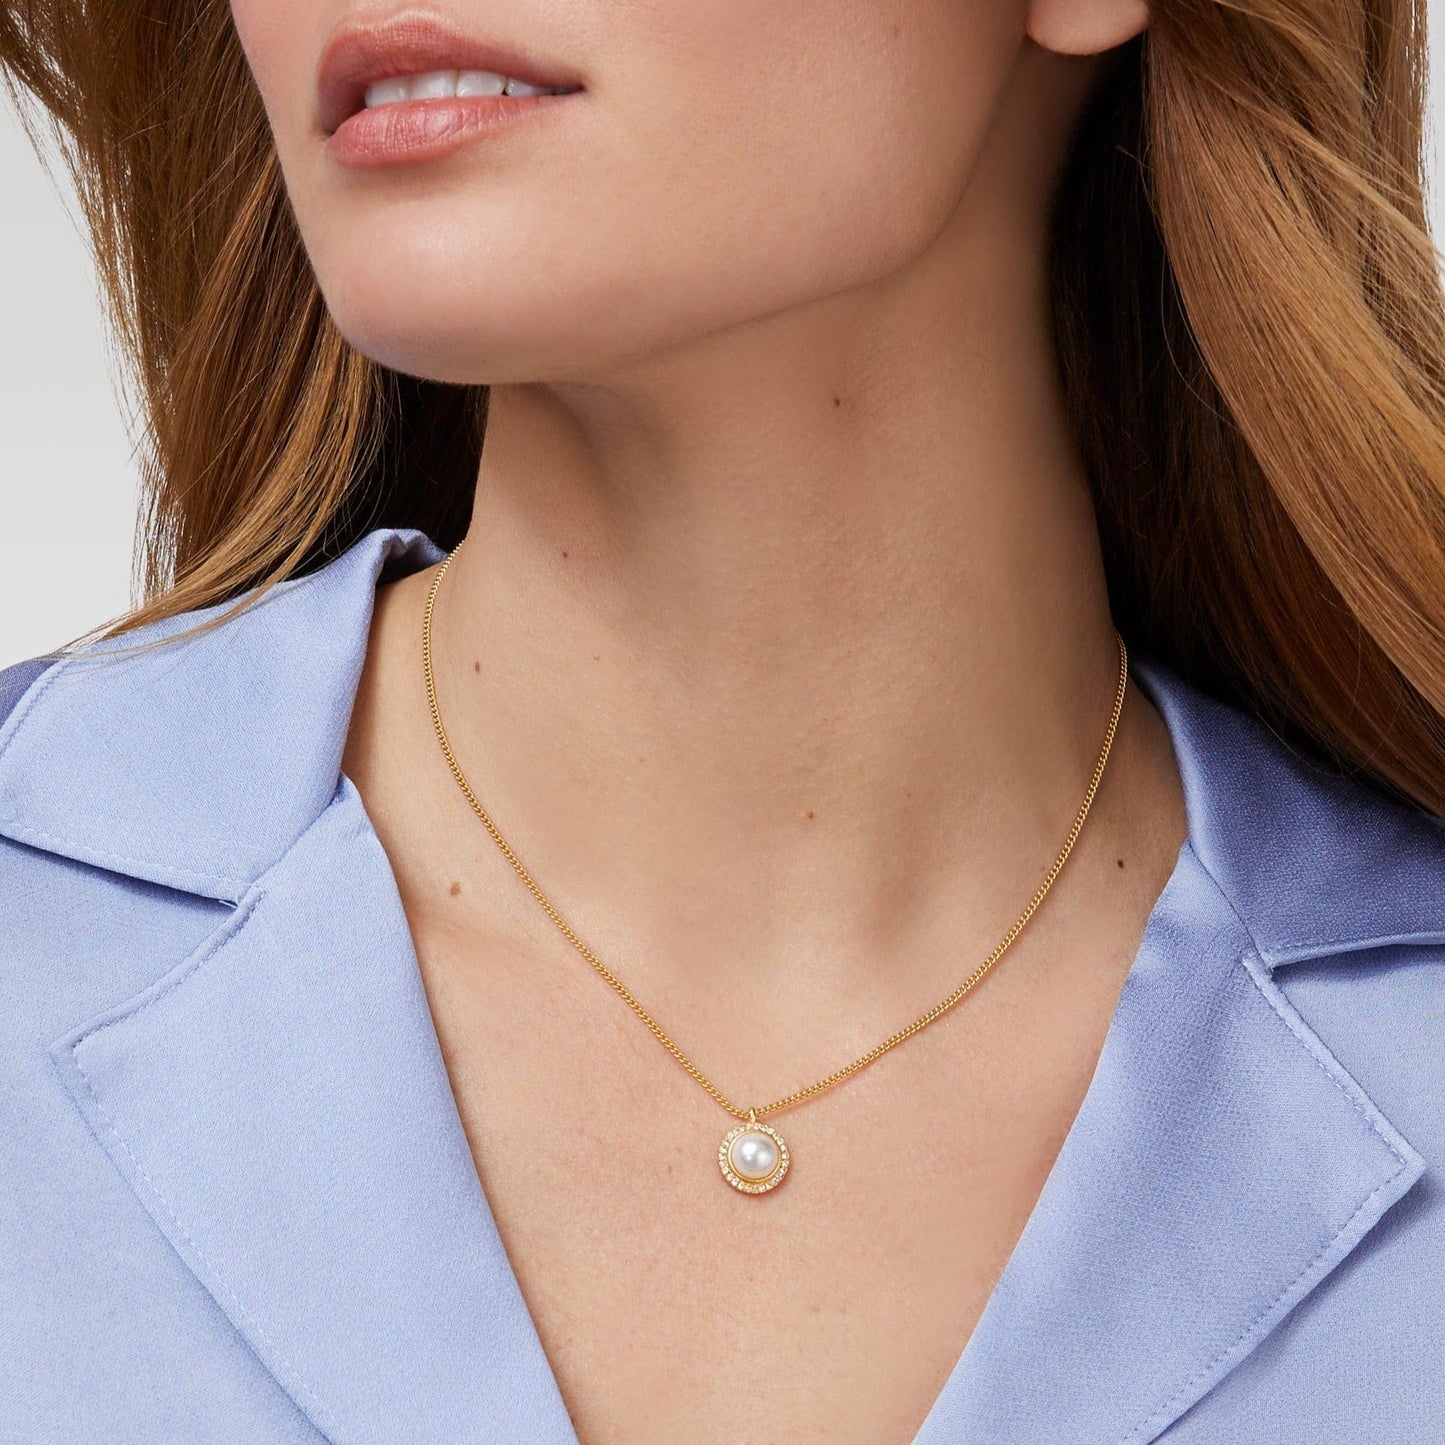 NKL-GPL Odette Pearl Solitaire Necklace